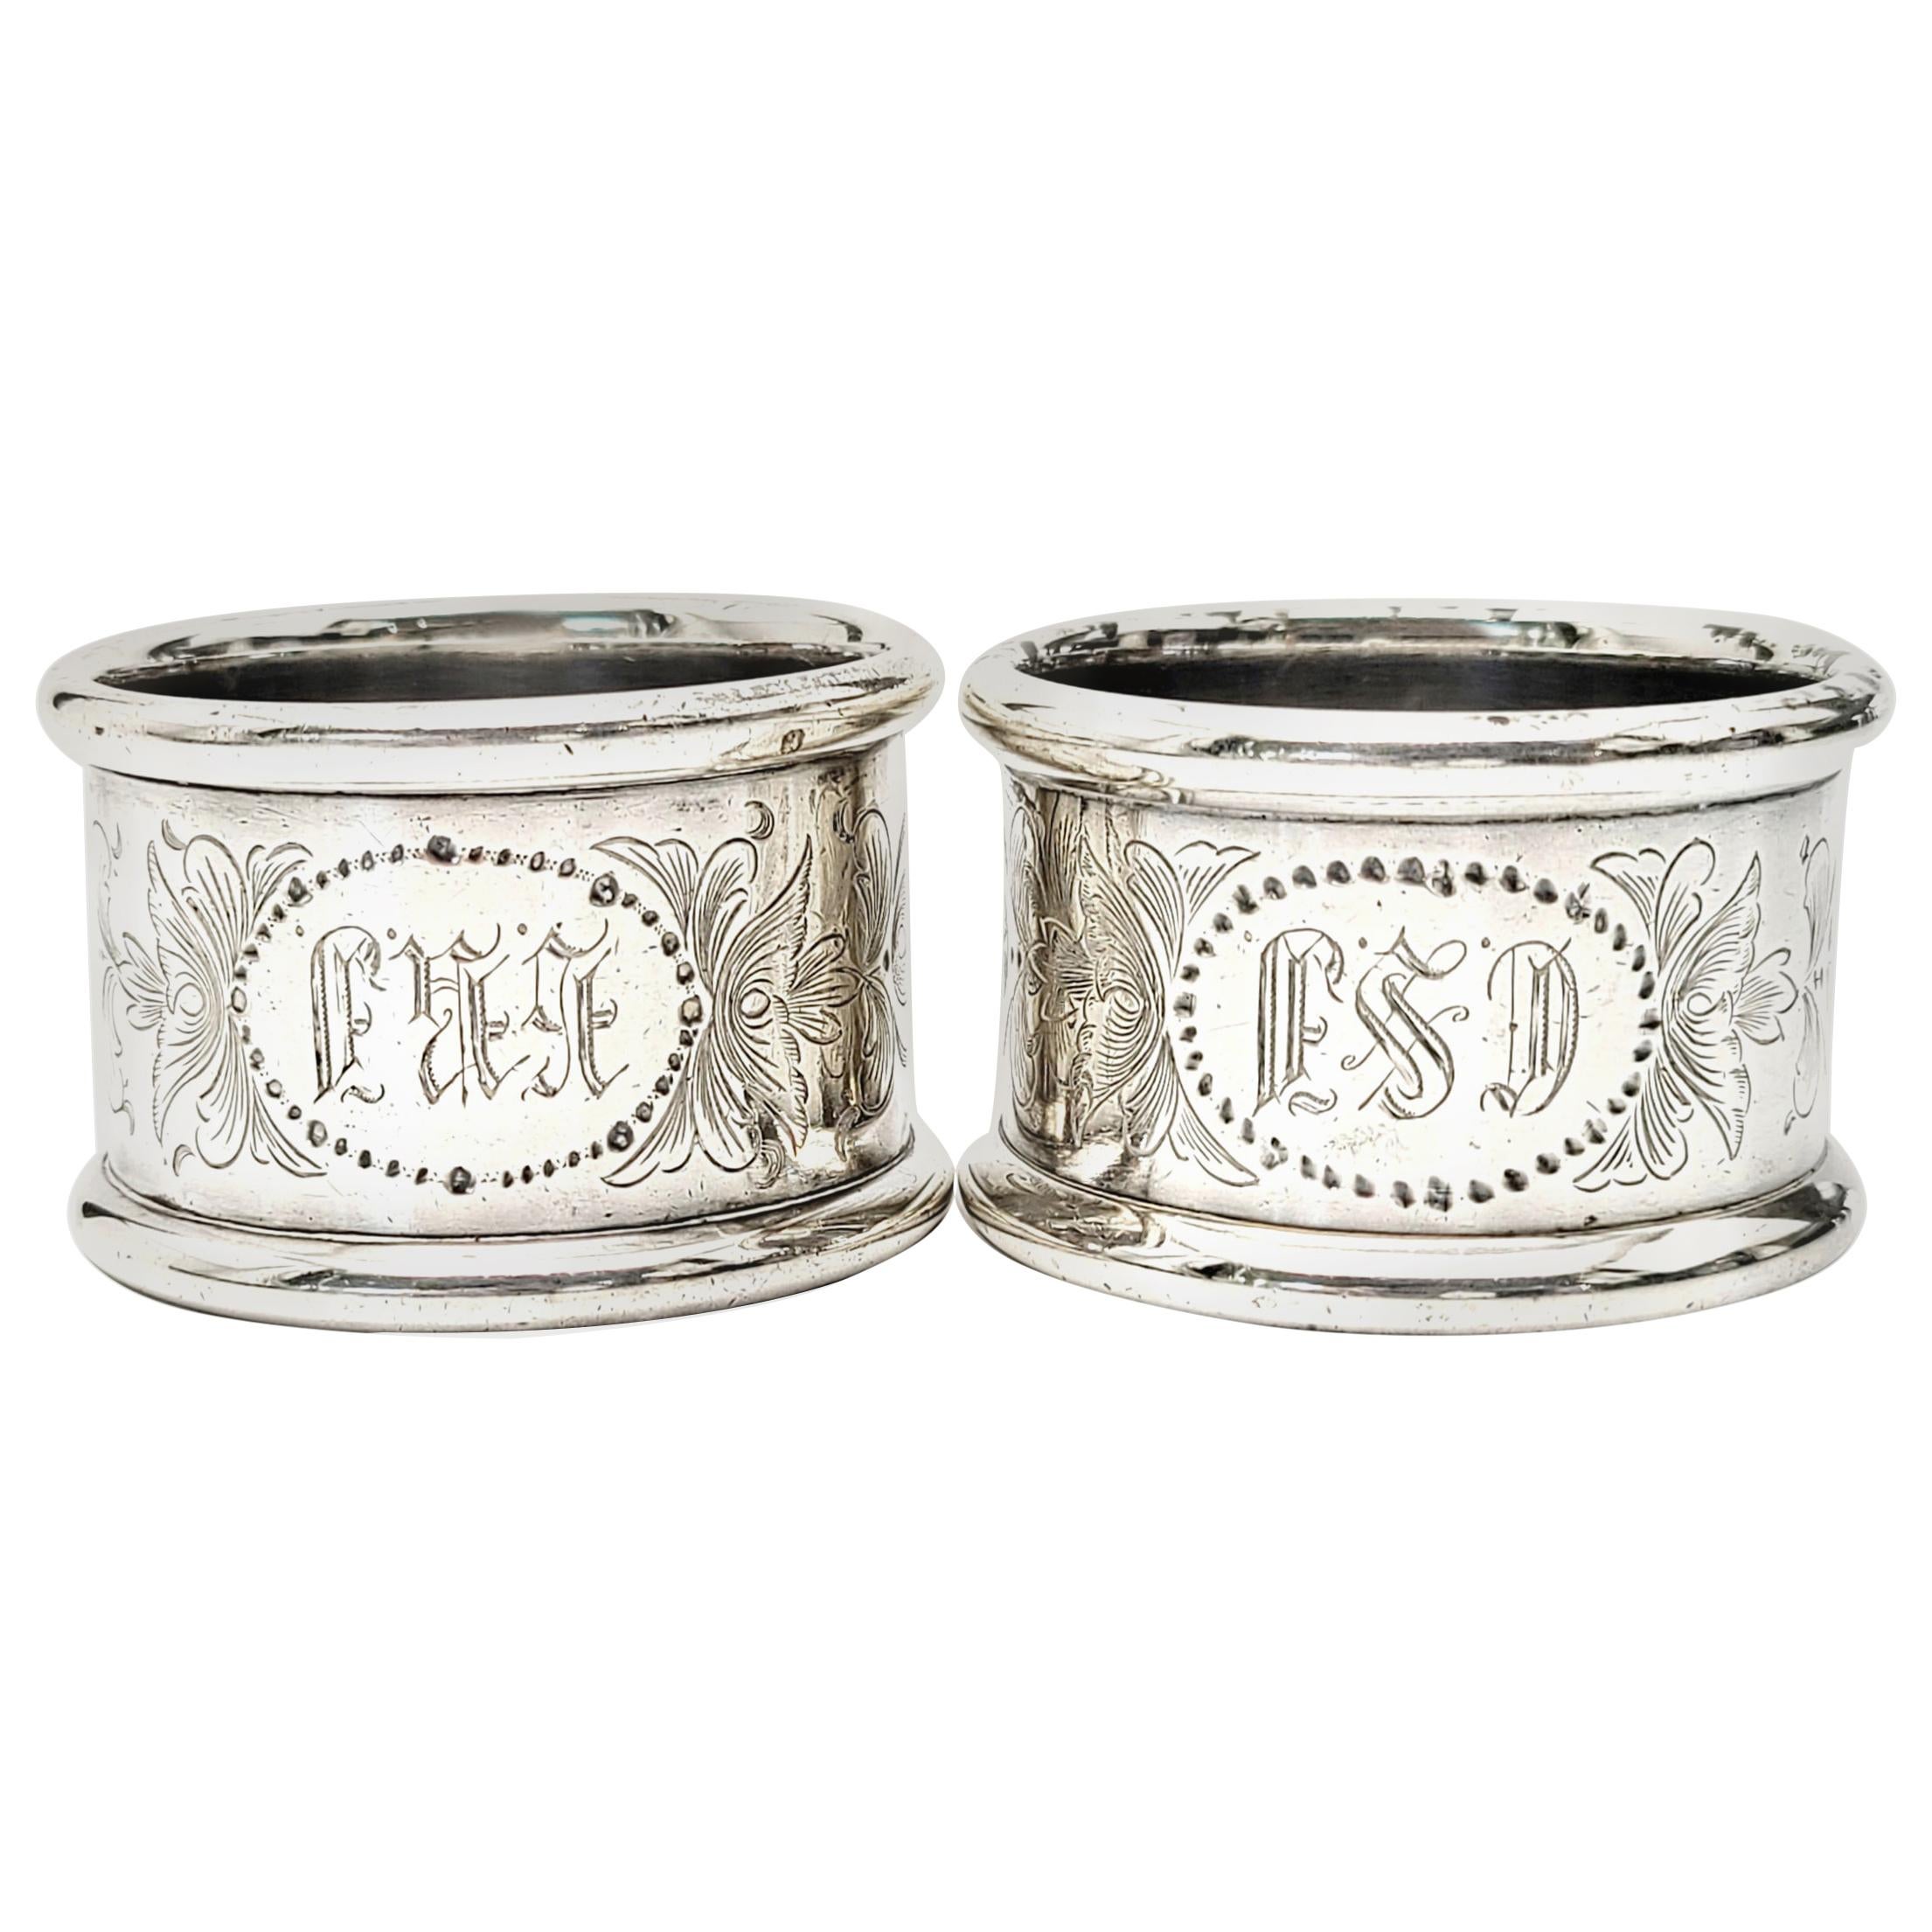 Set of 2 Towle Sterling Silver Napkin Rings 8770